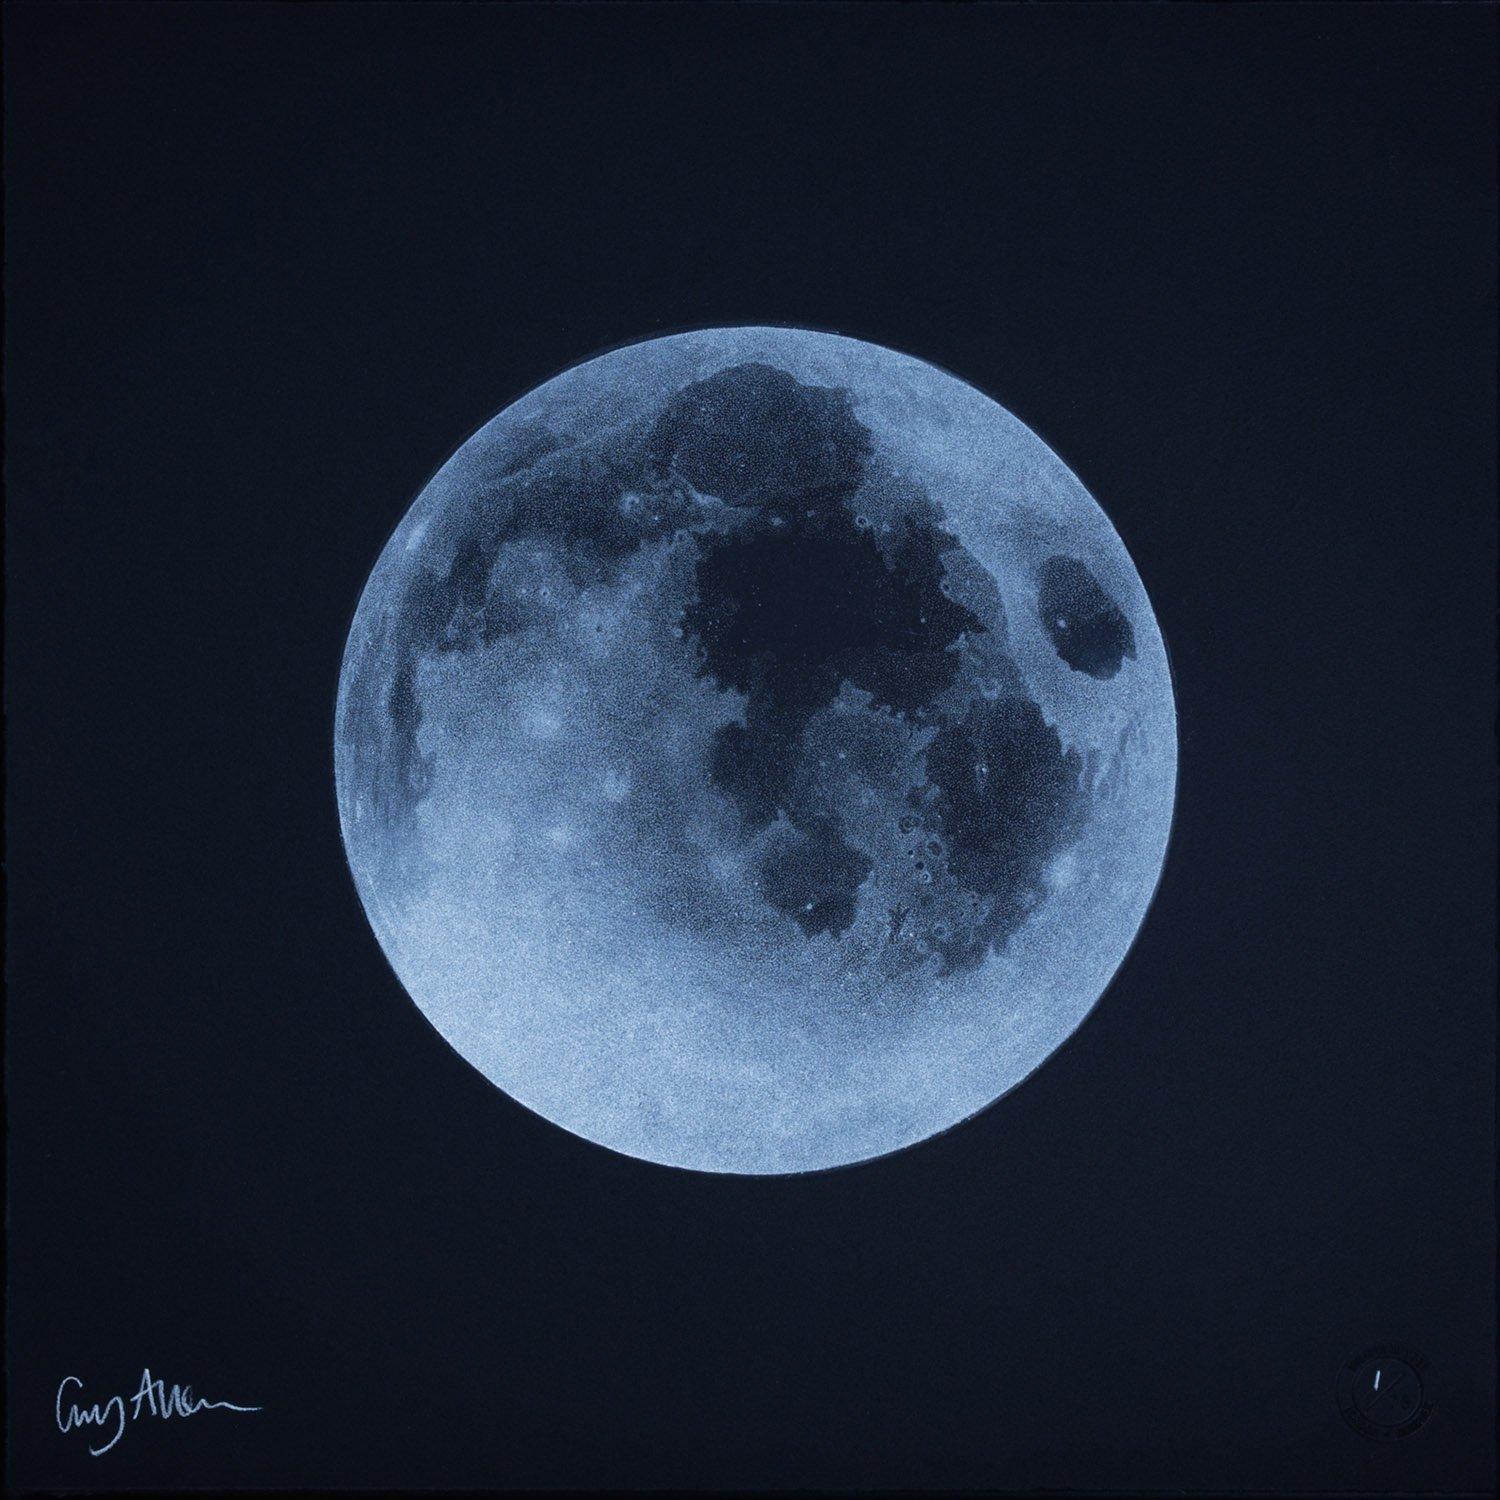 The full moon is the lunar phase when the Moon appears fully illuminated from Earth’s perspective. This occurs when the Earth is located between the Sun and the Moon.  This means that the lunar hemisphere facing Earth – the near side – is completely